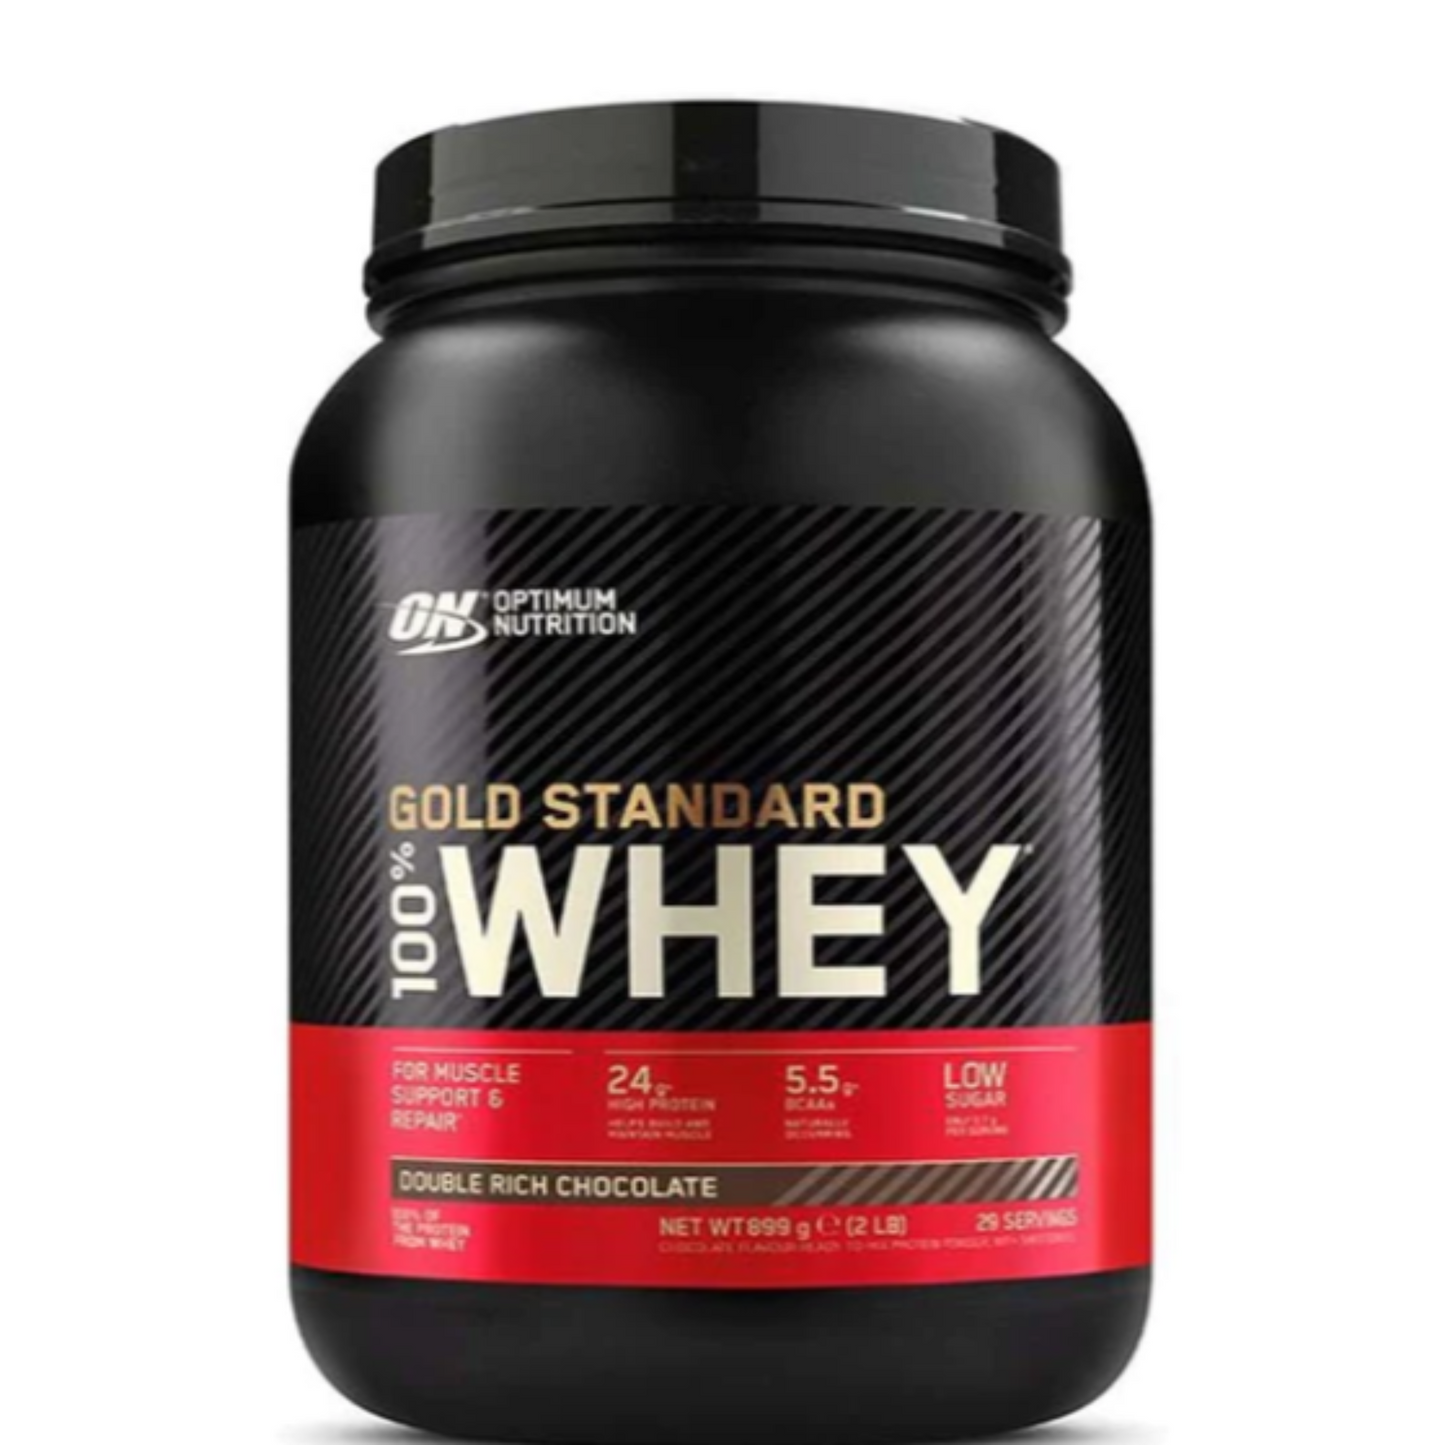 GOLD STANDARD WHEY PROTEIN ISOLATION